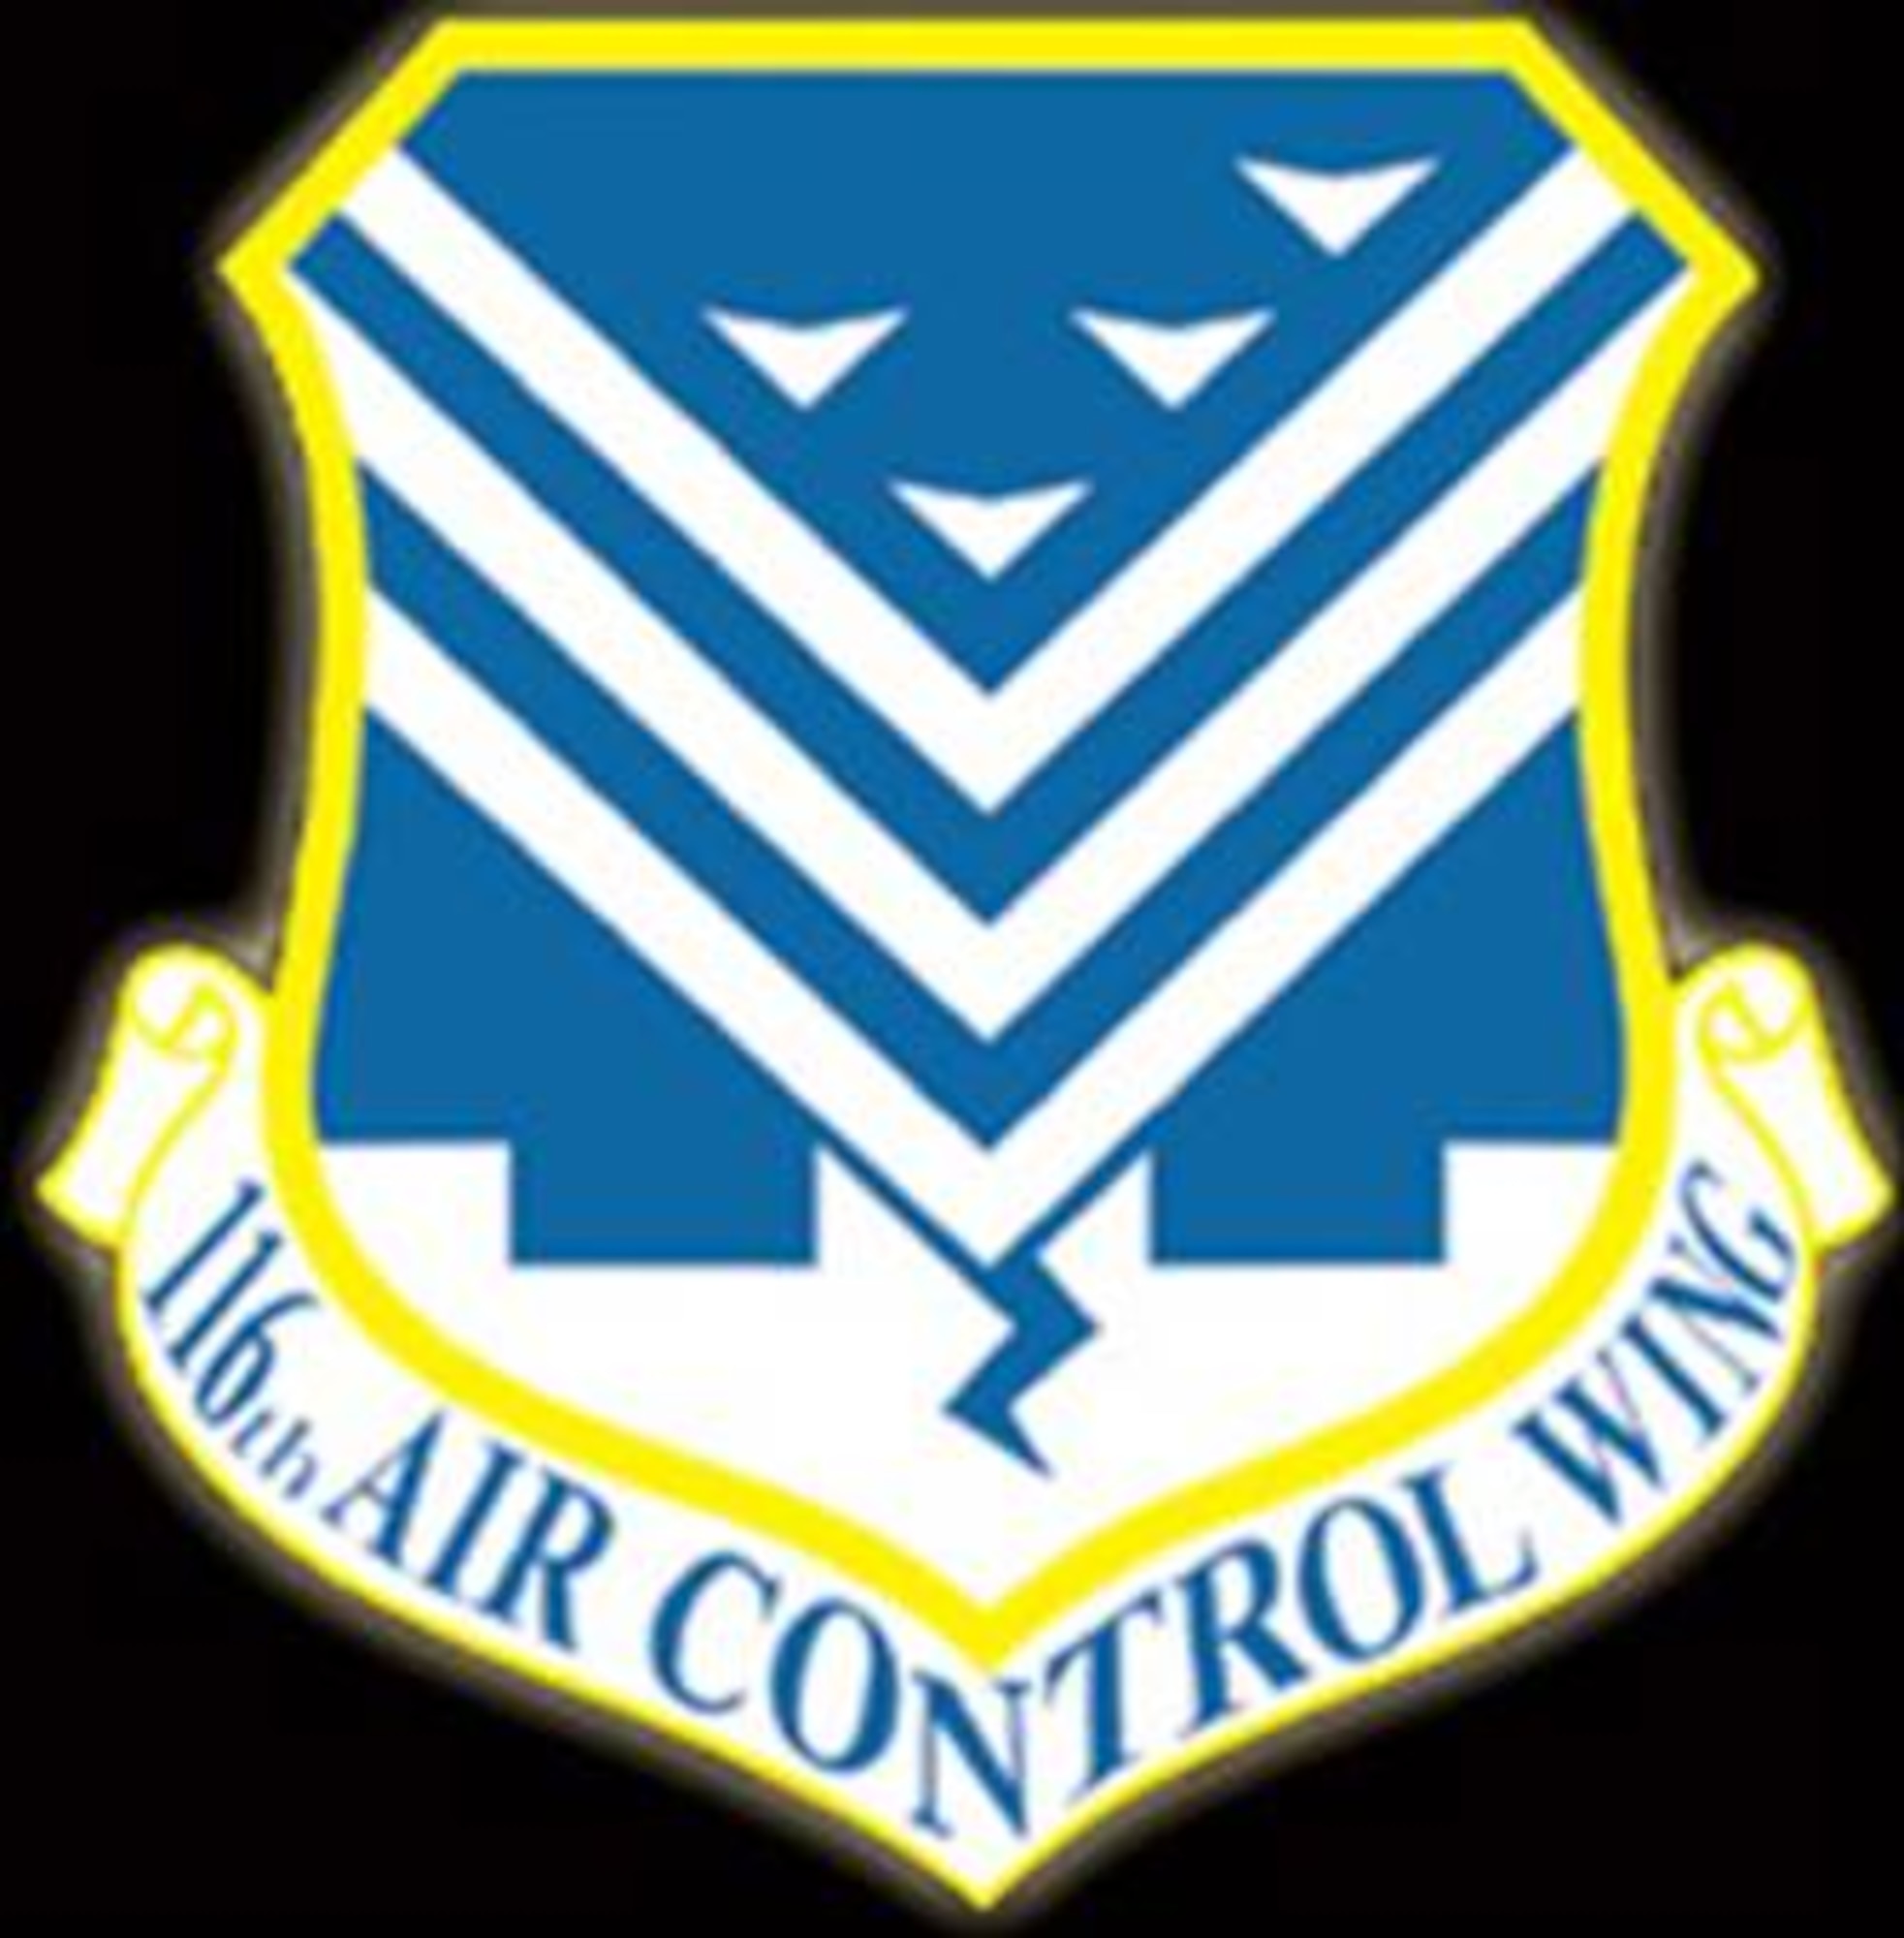 The 116th ACW is the only Air Force unit operating the E-8C Joint Surveillance Target Attack Radar System.